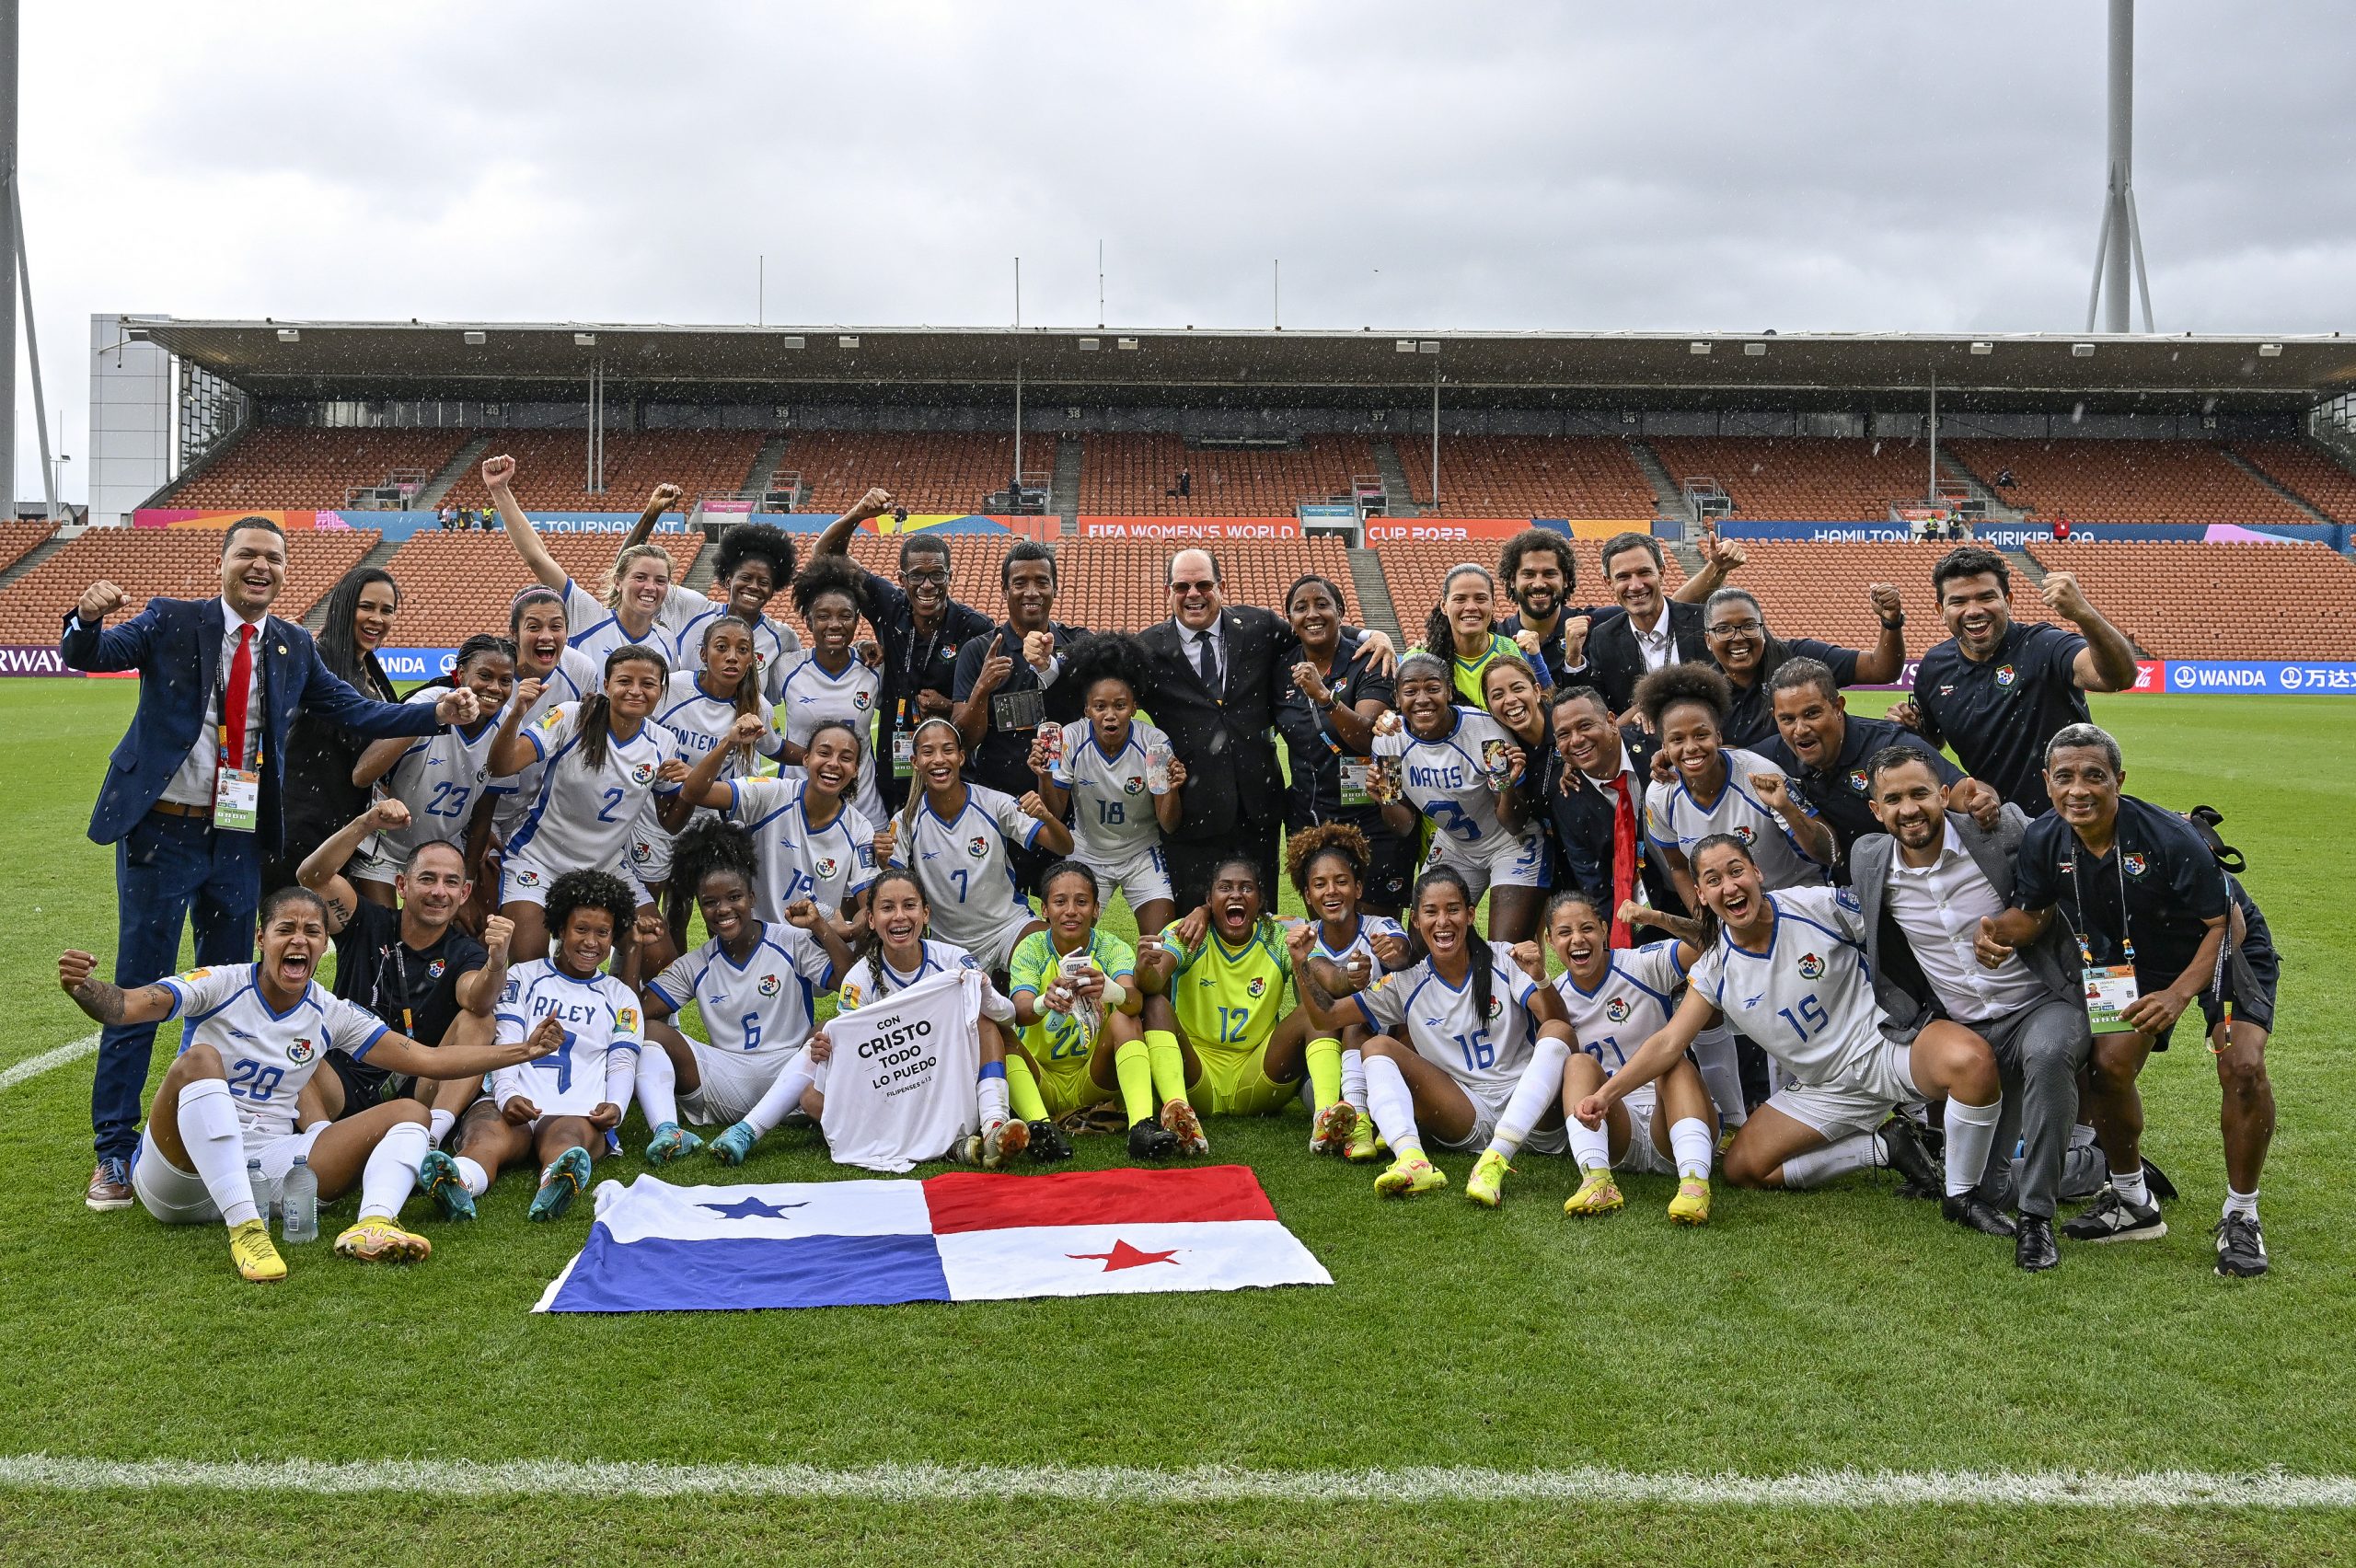 Panama players and staff celebrate winning the match and qualifying. Paraguay v Panama Play-off Tournament game for the FIFA Women’s World Cup Australia & New Zealand 2023 at FMG Stadium, Waikato, New Zealand on Thursday 23 February 2023. Mandatory credit: Alan Lee / www.photosport.nz